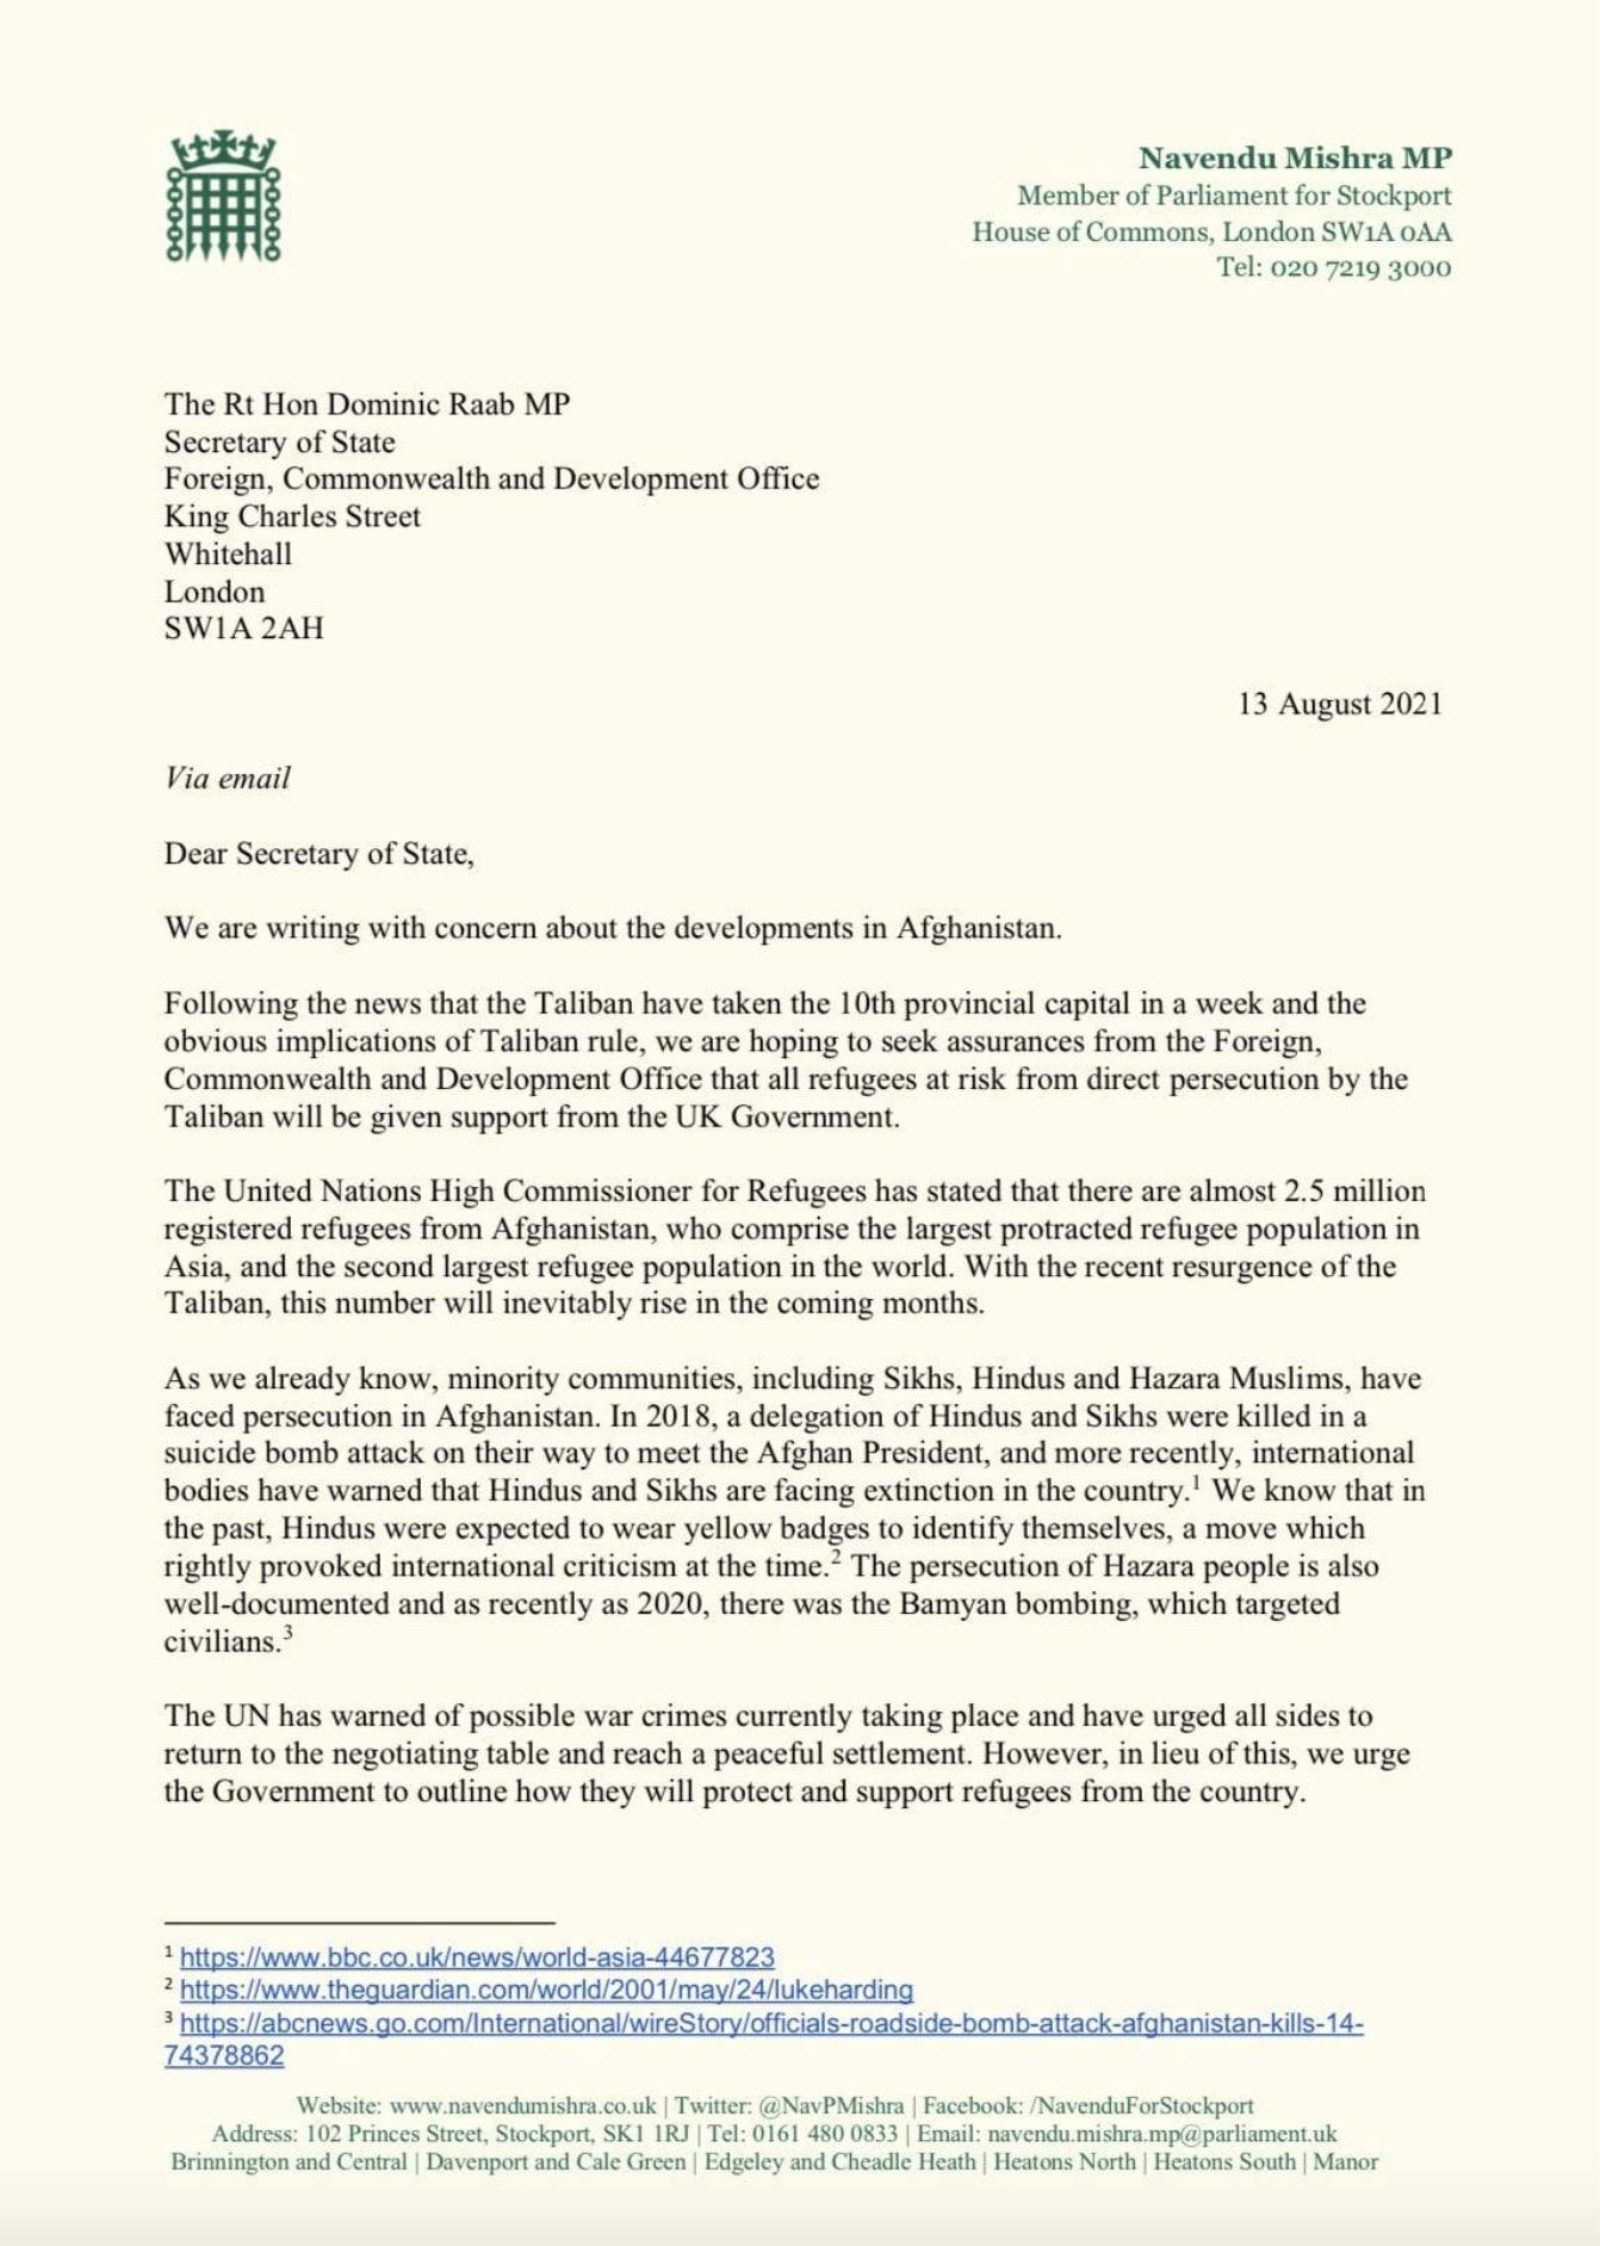 Image of a letter to the Home Secretary